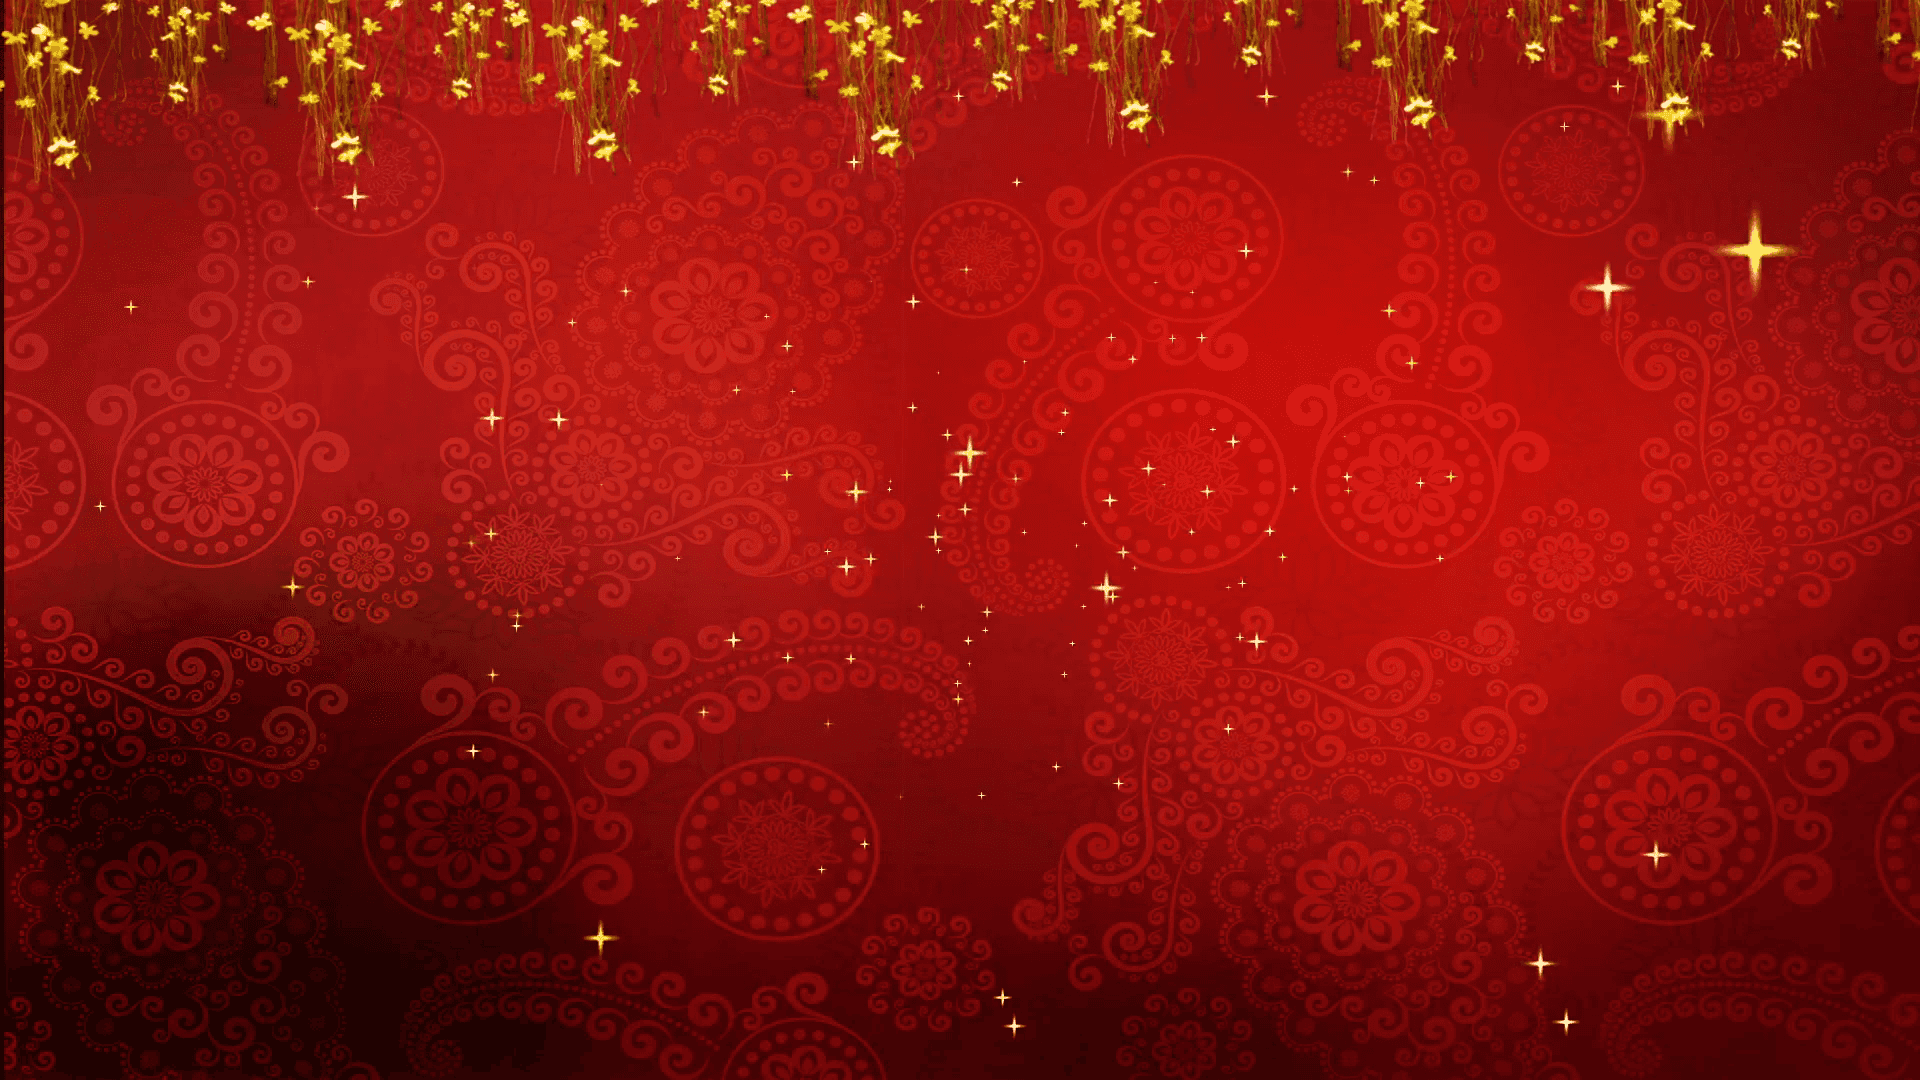 "Enjoy the Festive Season with This Colorful Background"